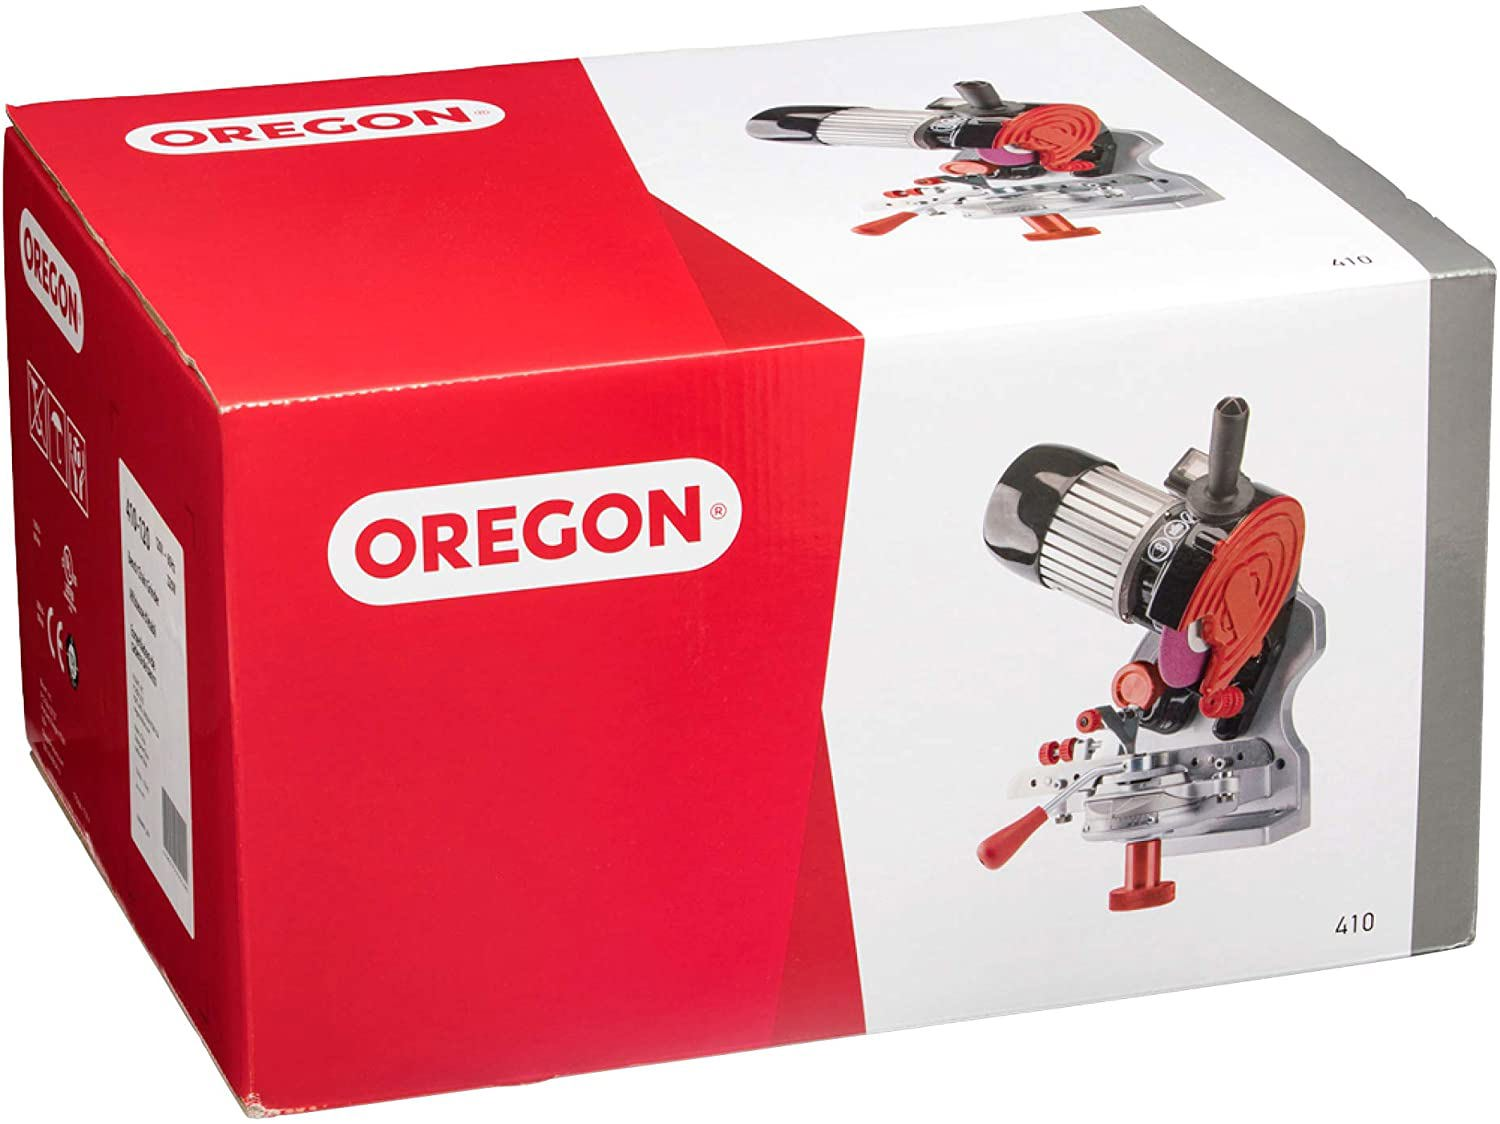 Oregon 410-120 Bench or Wall Mounted Saw Chain Grinder 